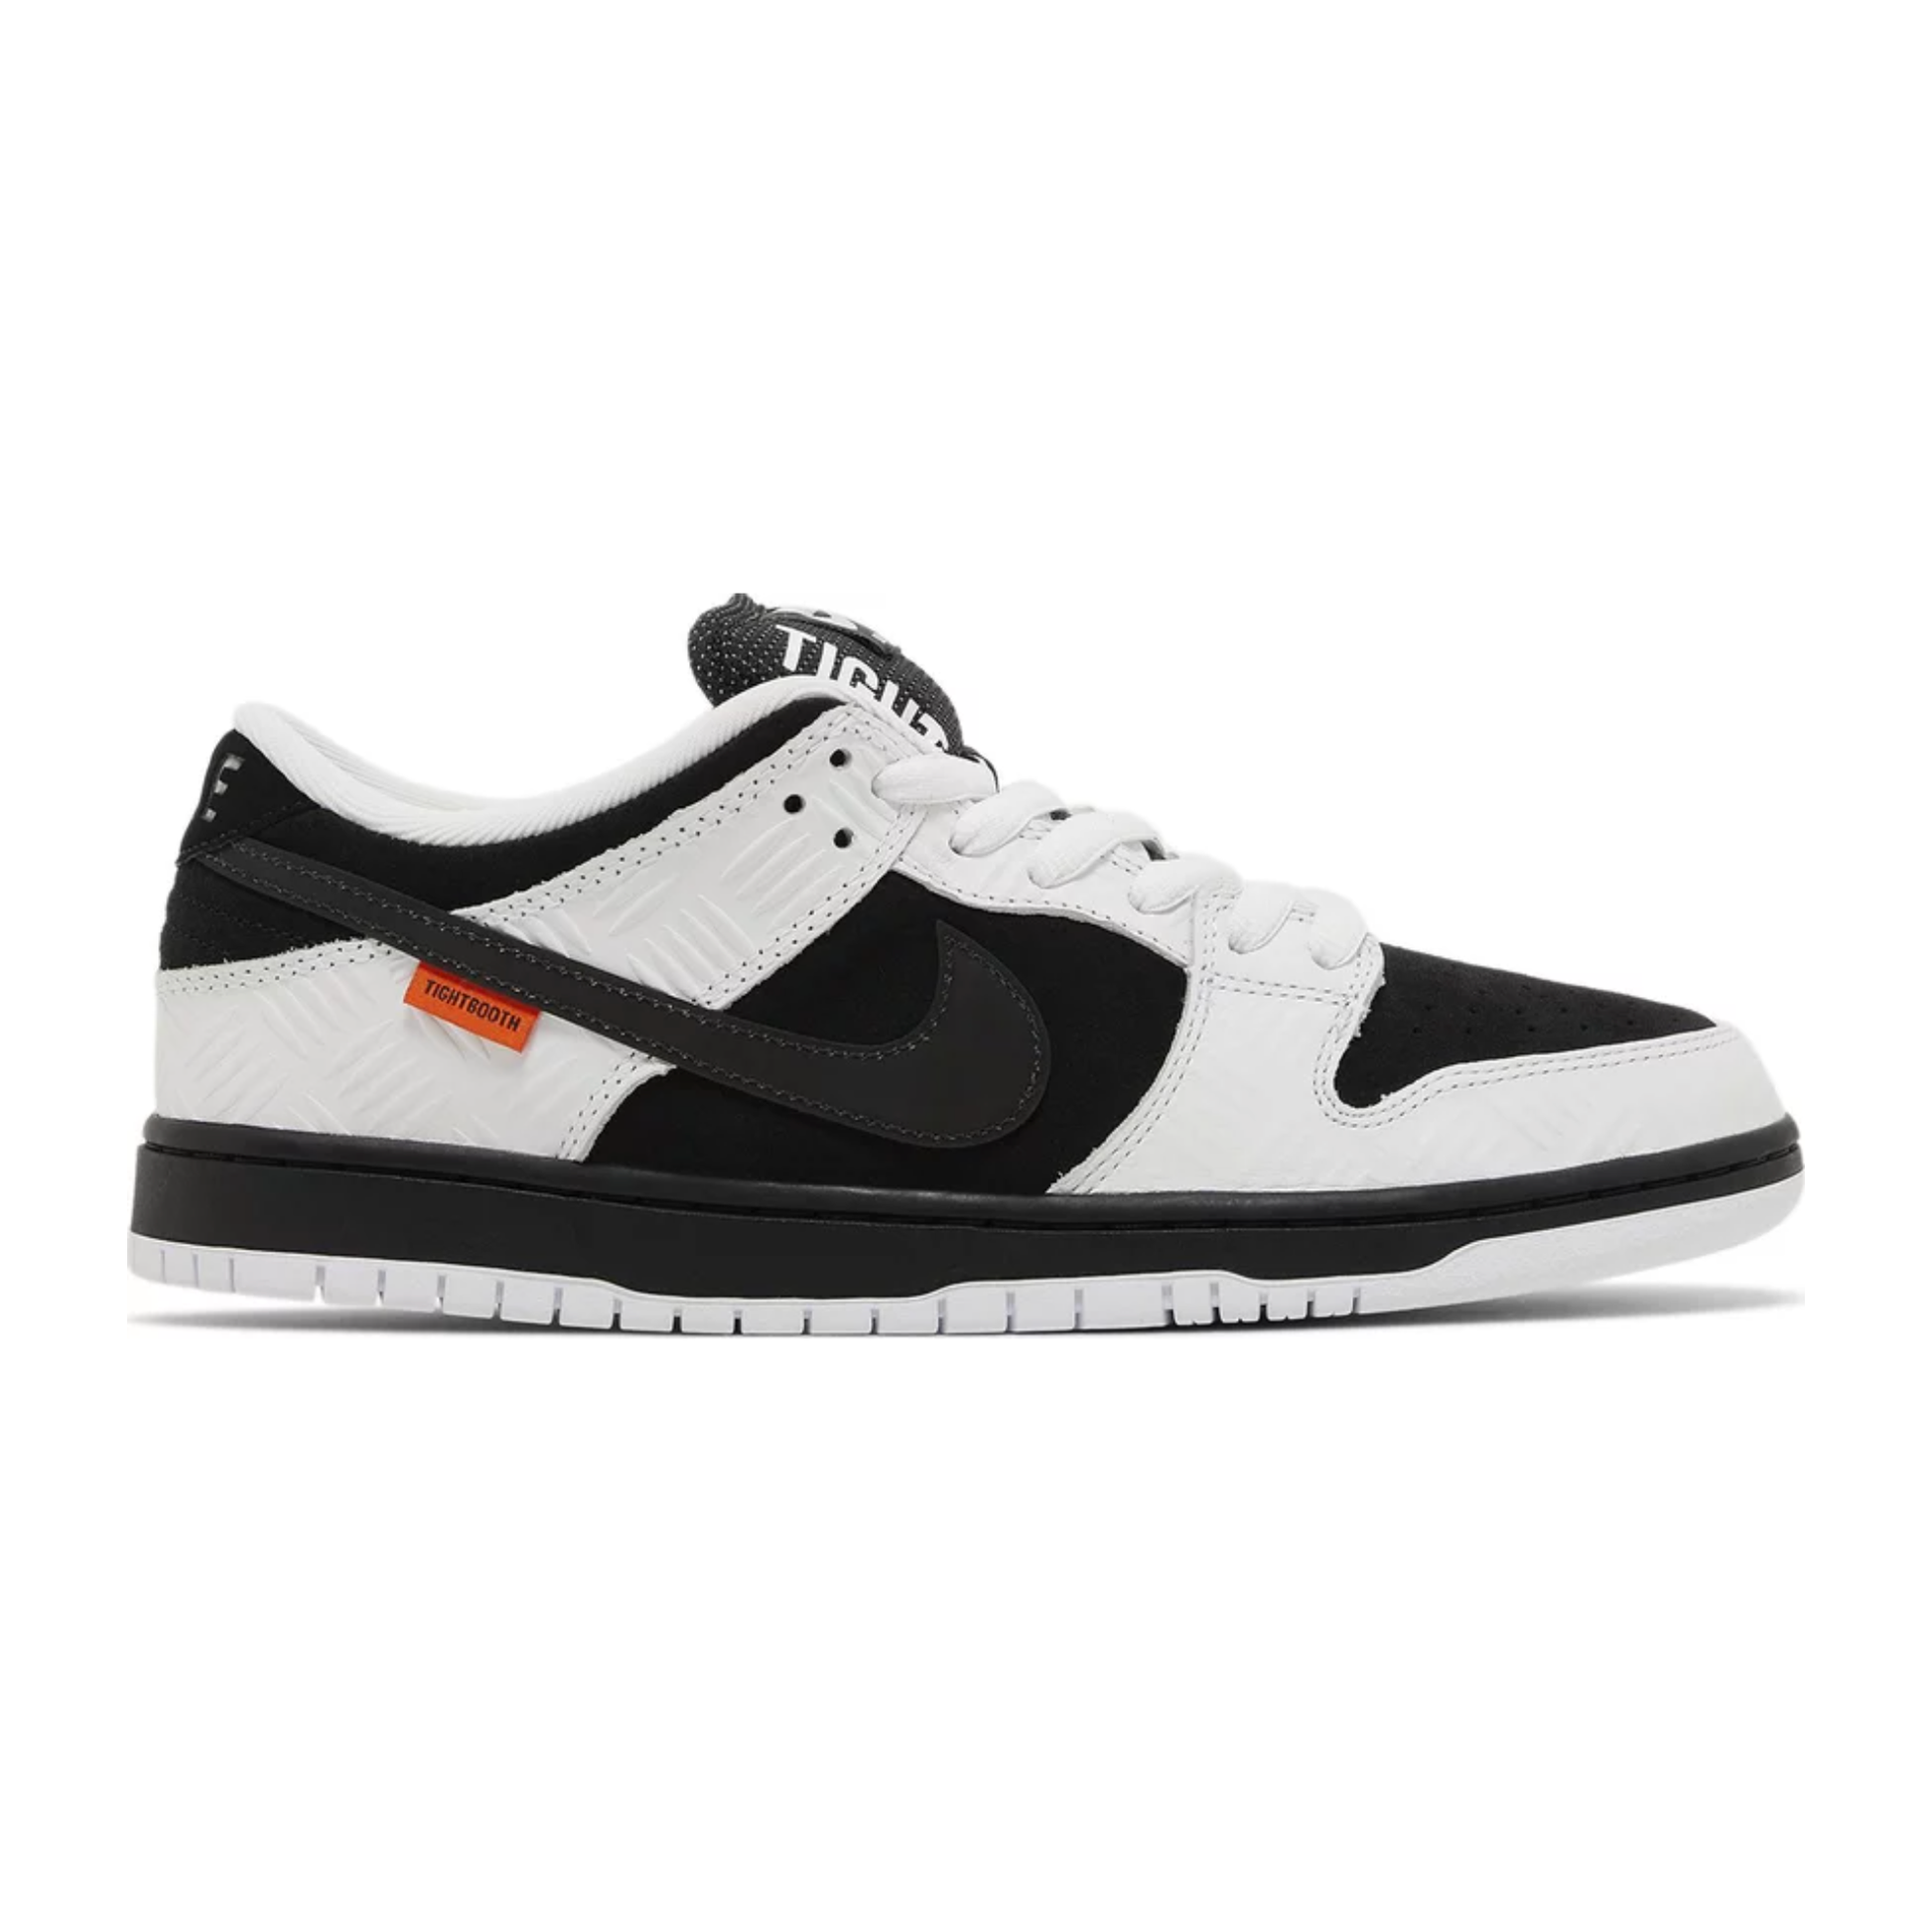 Nike SB Dunk Low Tightbooth from Nike